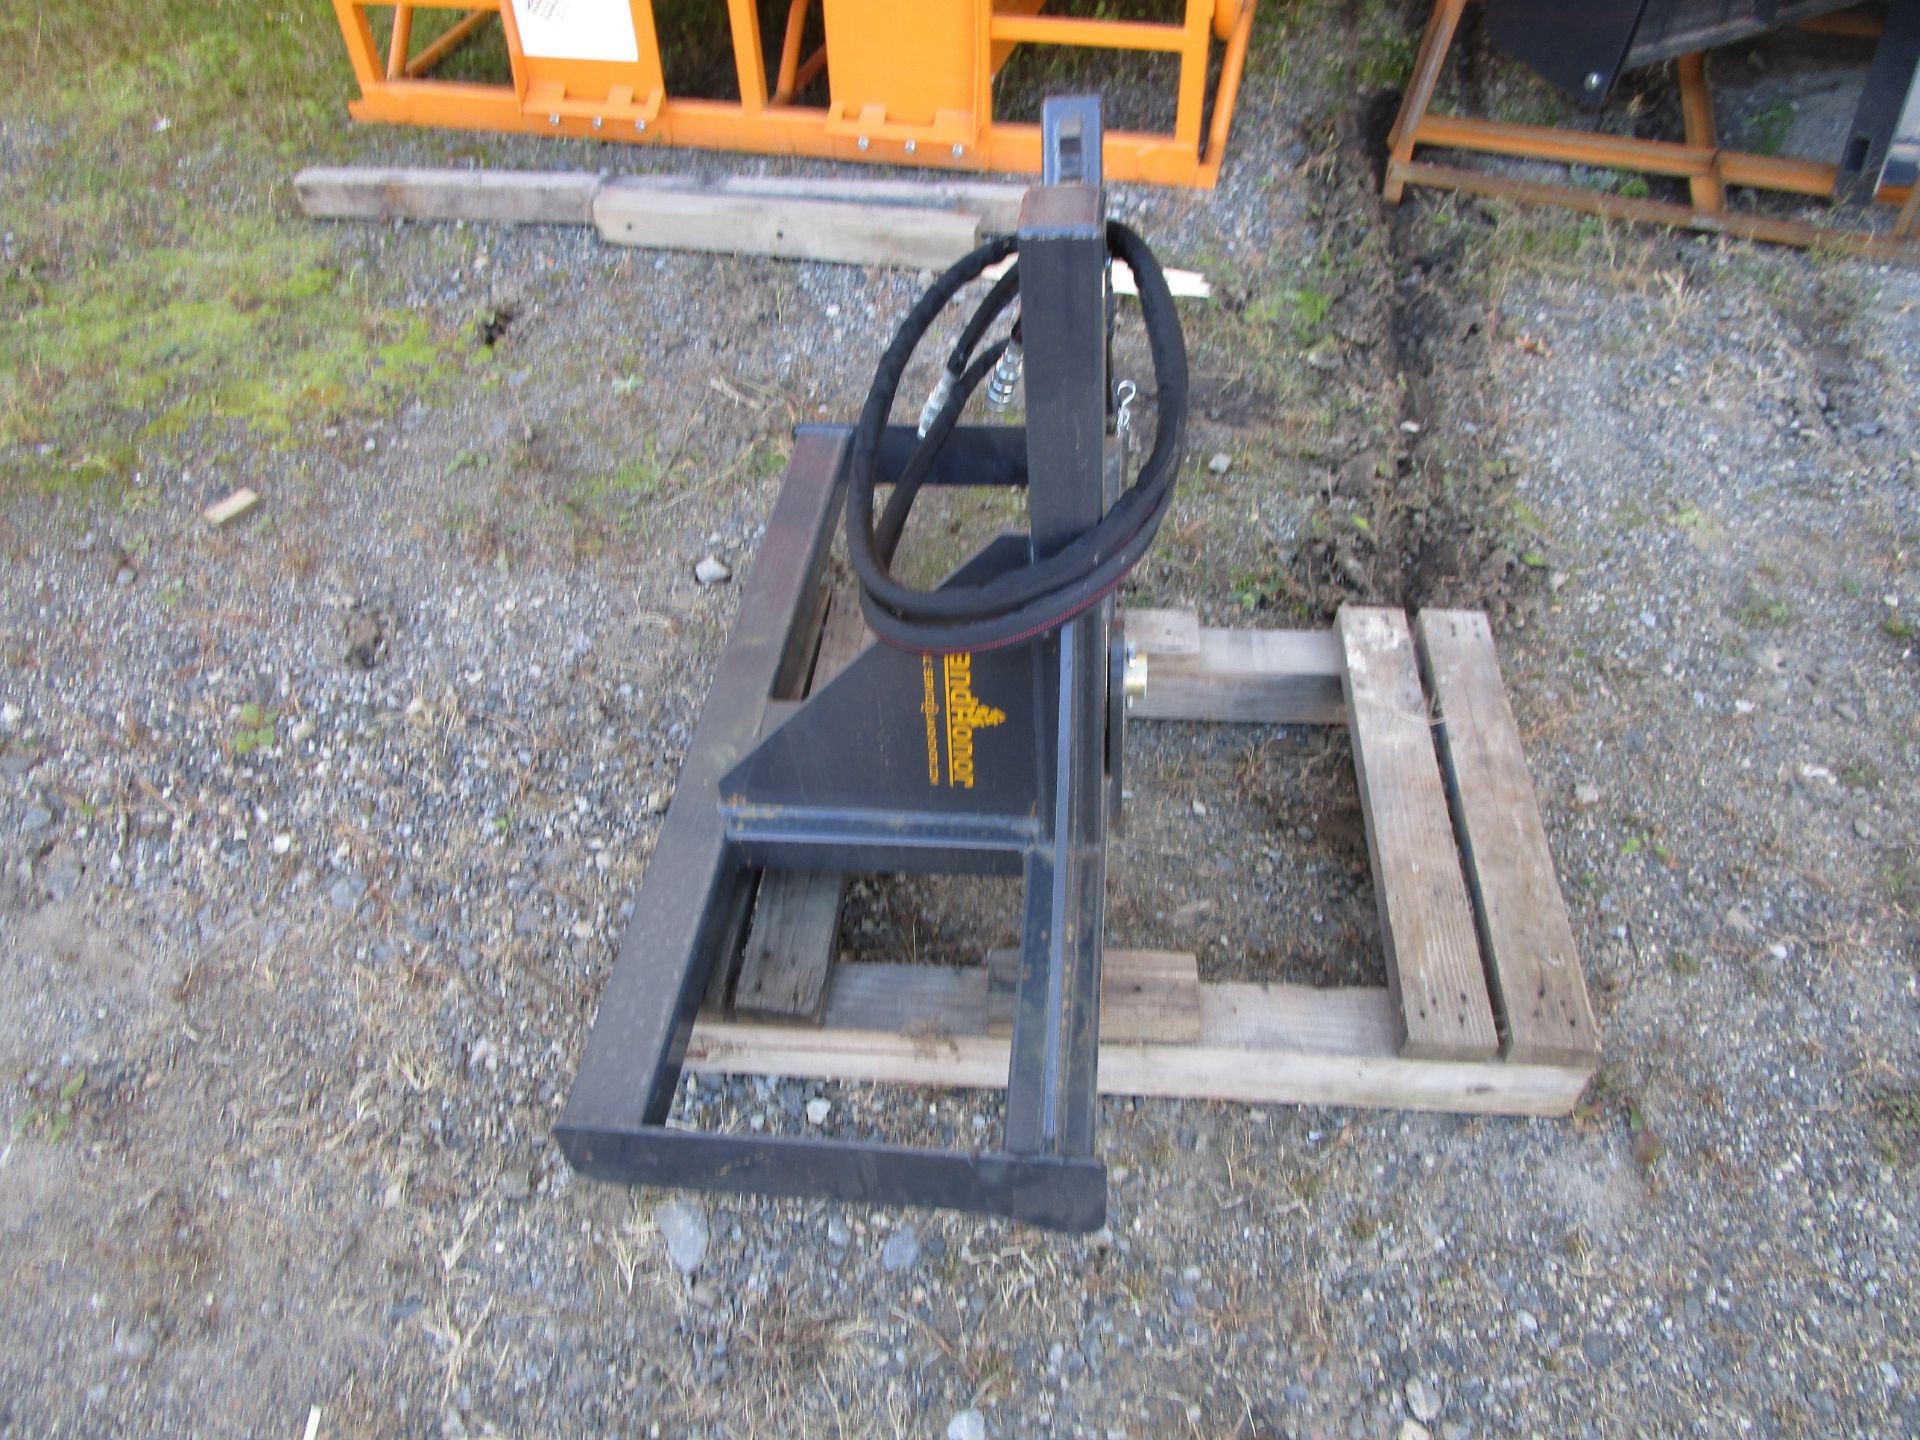 New Wolverine Skid Steer Attachment Tree Puller/Grappler (C69E) - Image 2 of 5